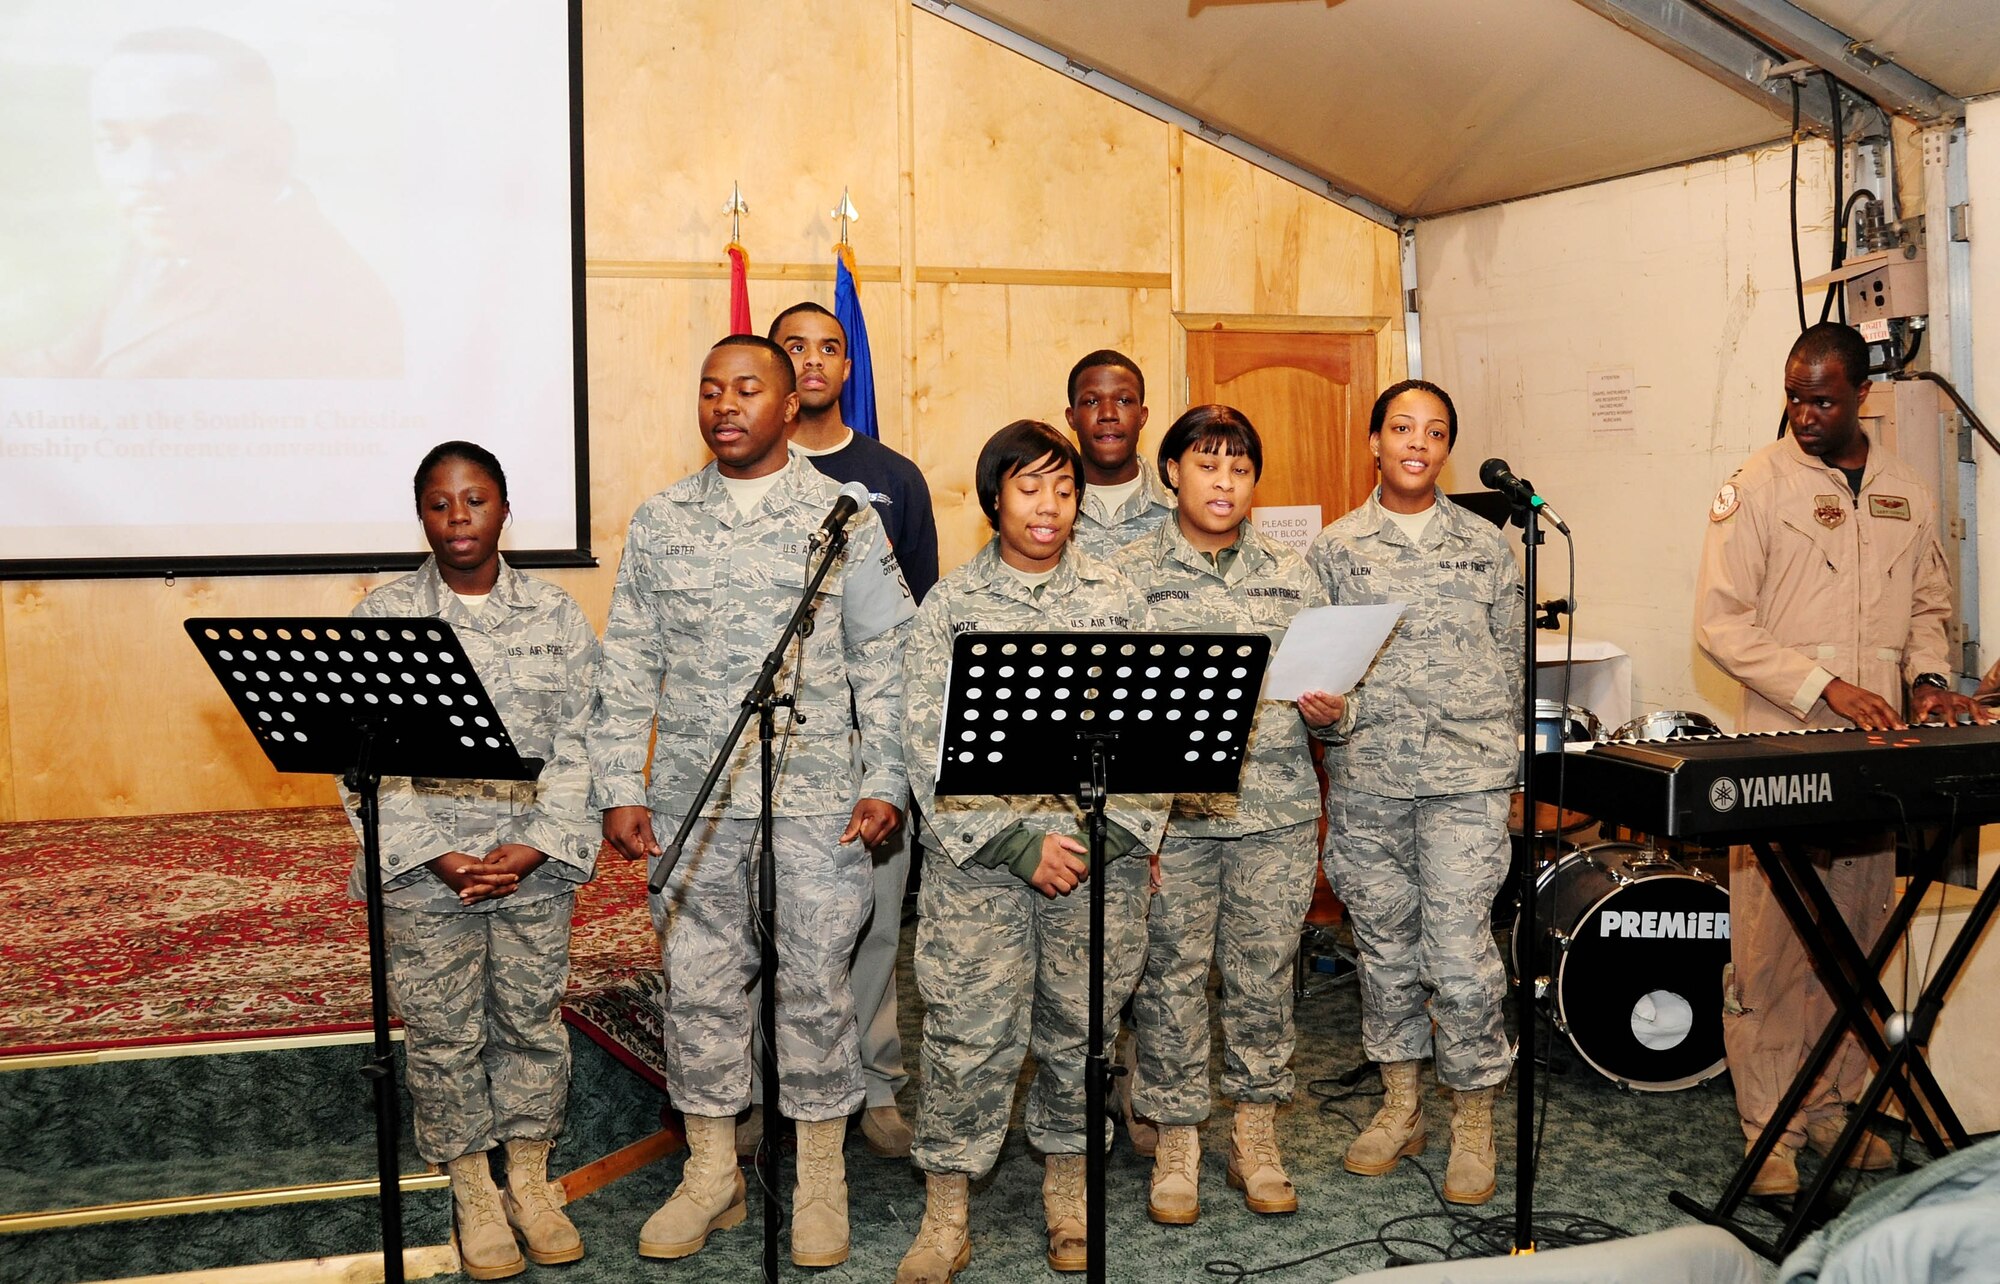 The 376th Air Expeditionary Wing Gospel choir performs "Lift Every Voice" during the Martin Luther King, Jr. Remembrance Ceremony at the Transit Center at Manas, Kyrgyzstan, Jan. 18, 2010. (U.S Air Force photo/Senior Airman Nichelle Anderson/released)
